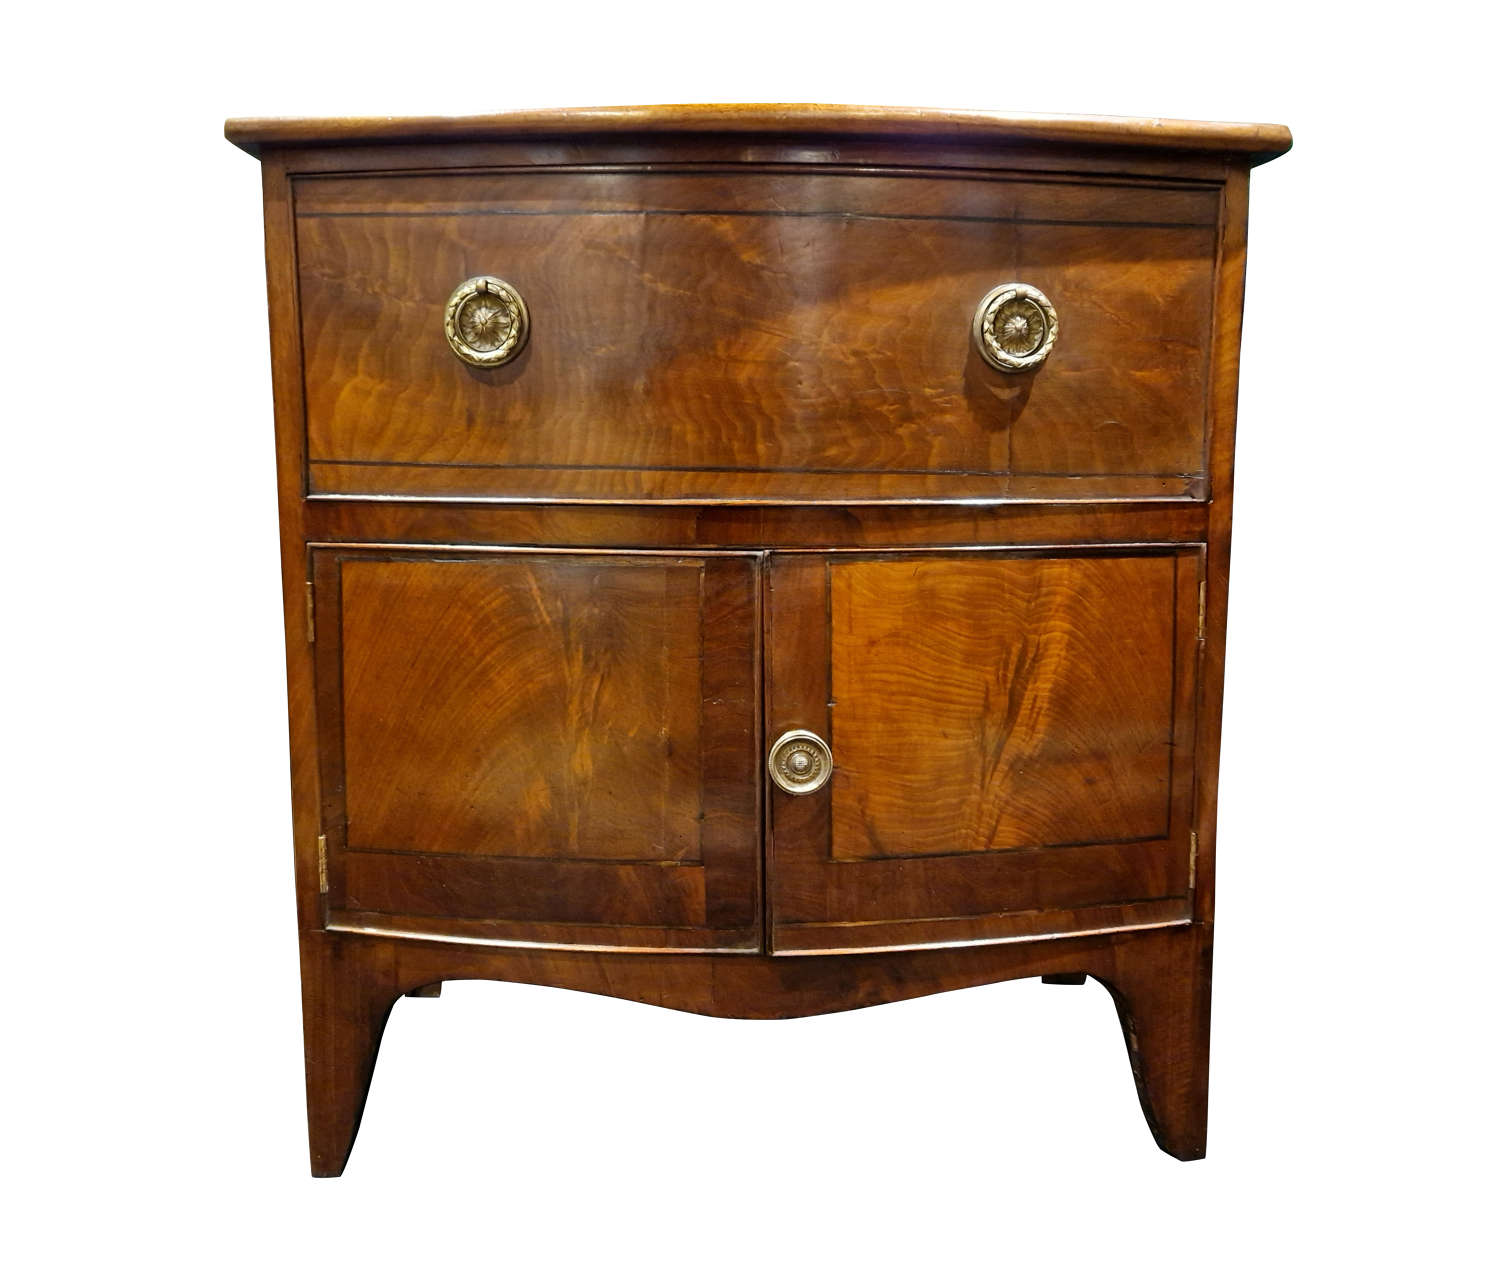 Mahogany Bowfront Bedside Cabinet c1820